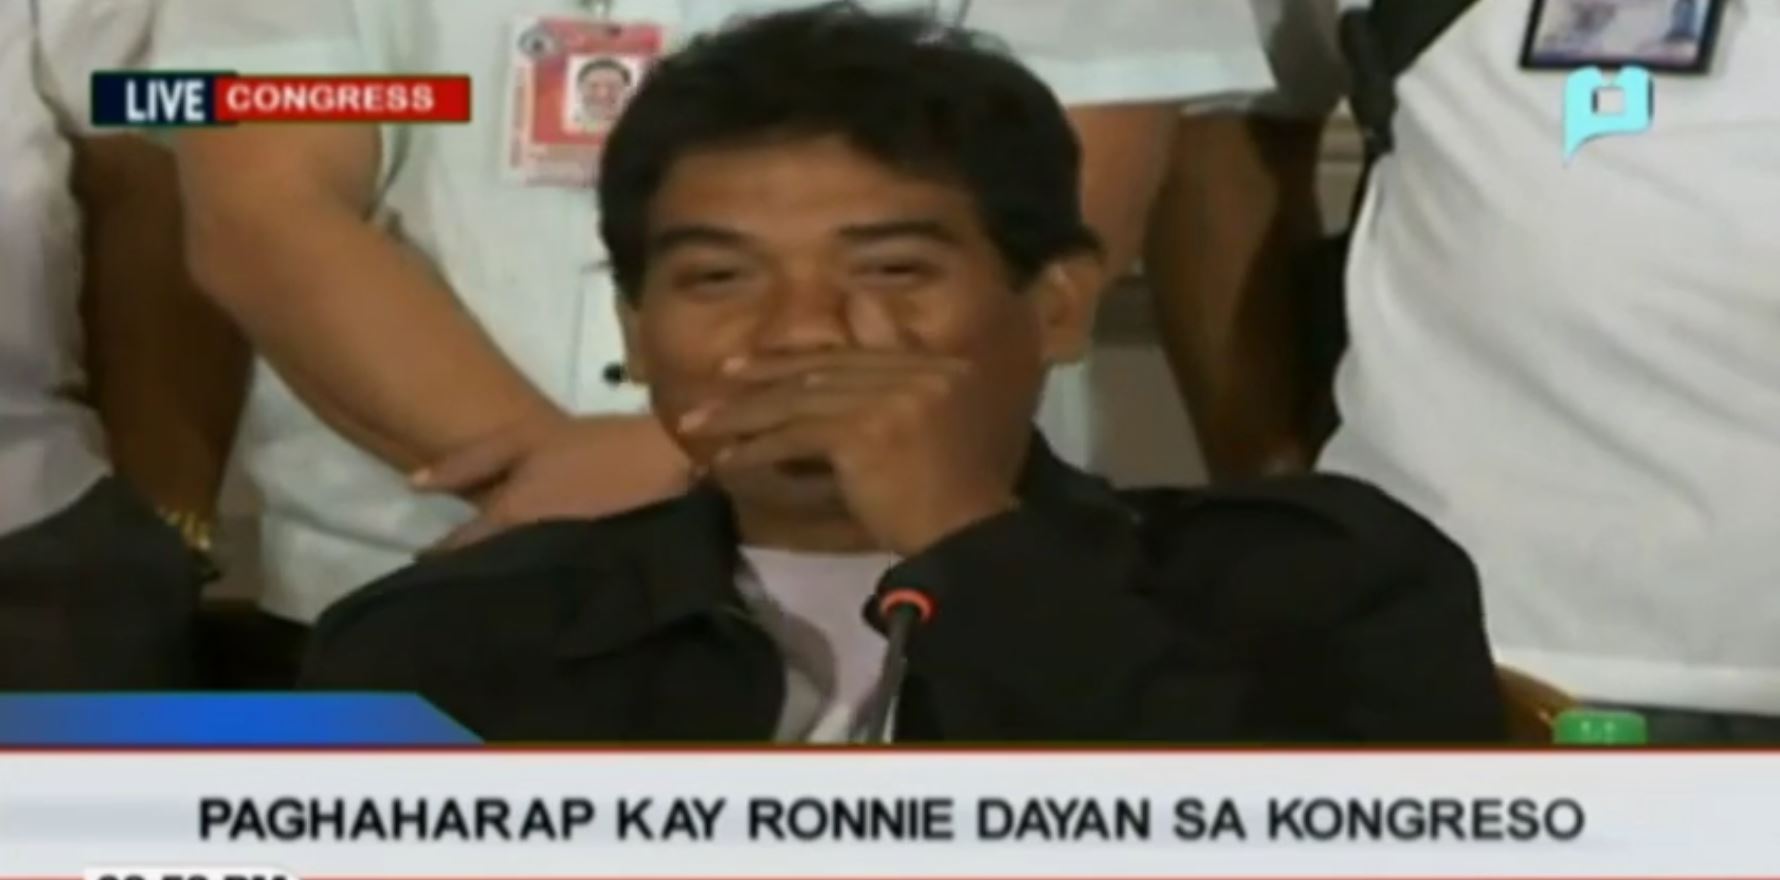 Ronnie Dayan covers his mouth to suppress a smile upon learning of De Lima's meesage of concern for him. (photo grabbed from PTV-4 video)